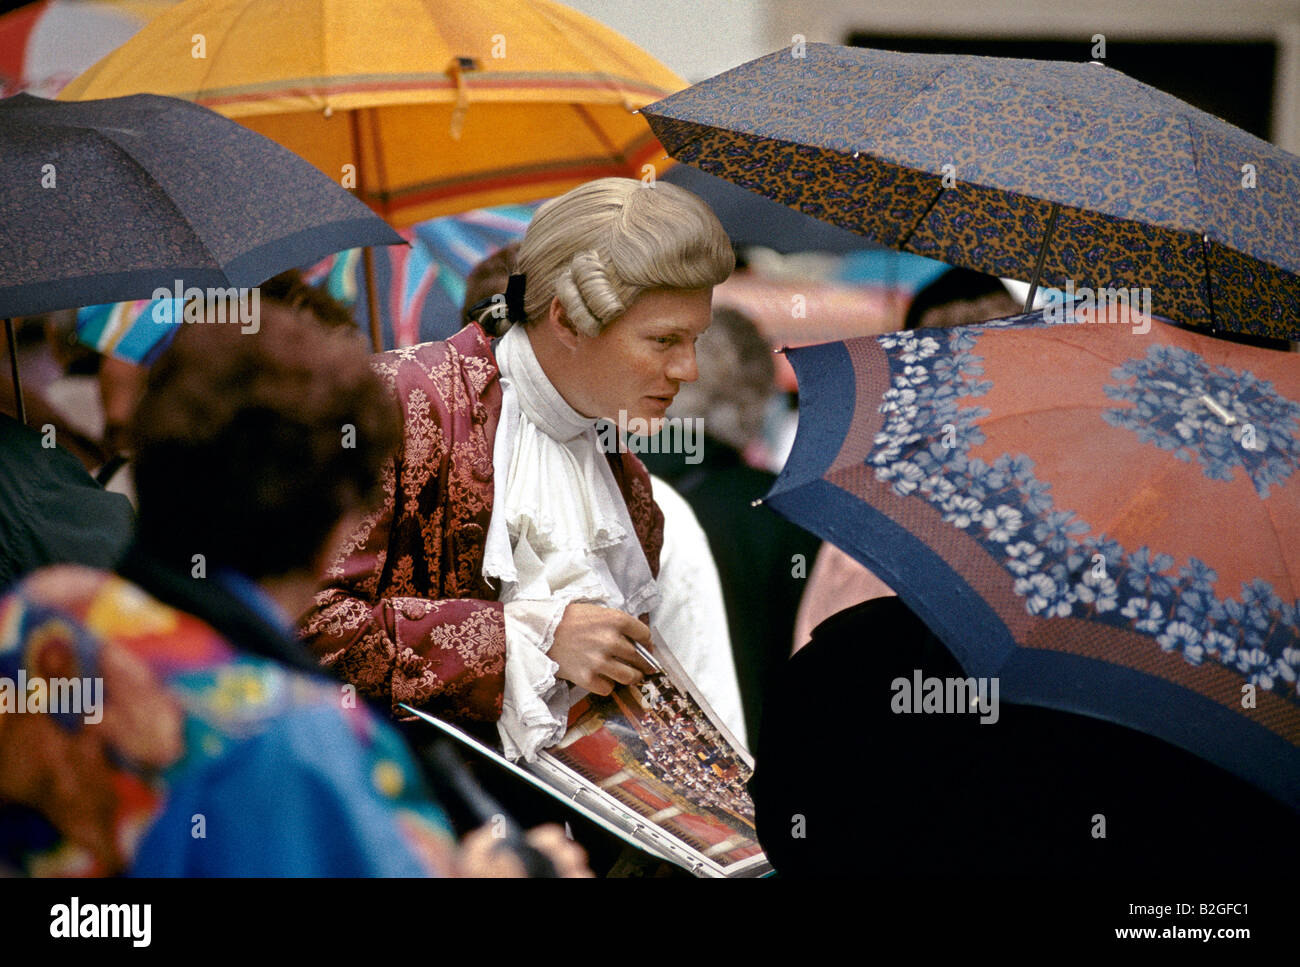 VIENNA 1995 AUSTRIA VIENNA 1995 A VENDOR DRESSED IN PERIOD COSTUME SELLS TICKETS TO A MOZART CONCERT Stock Photo